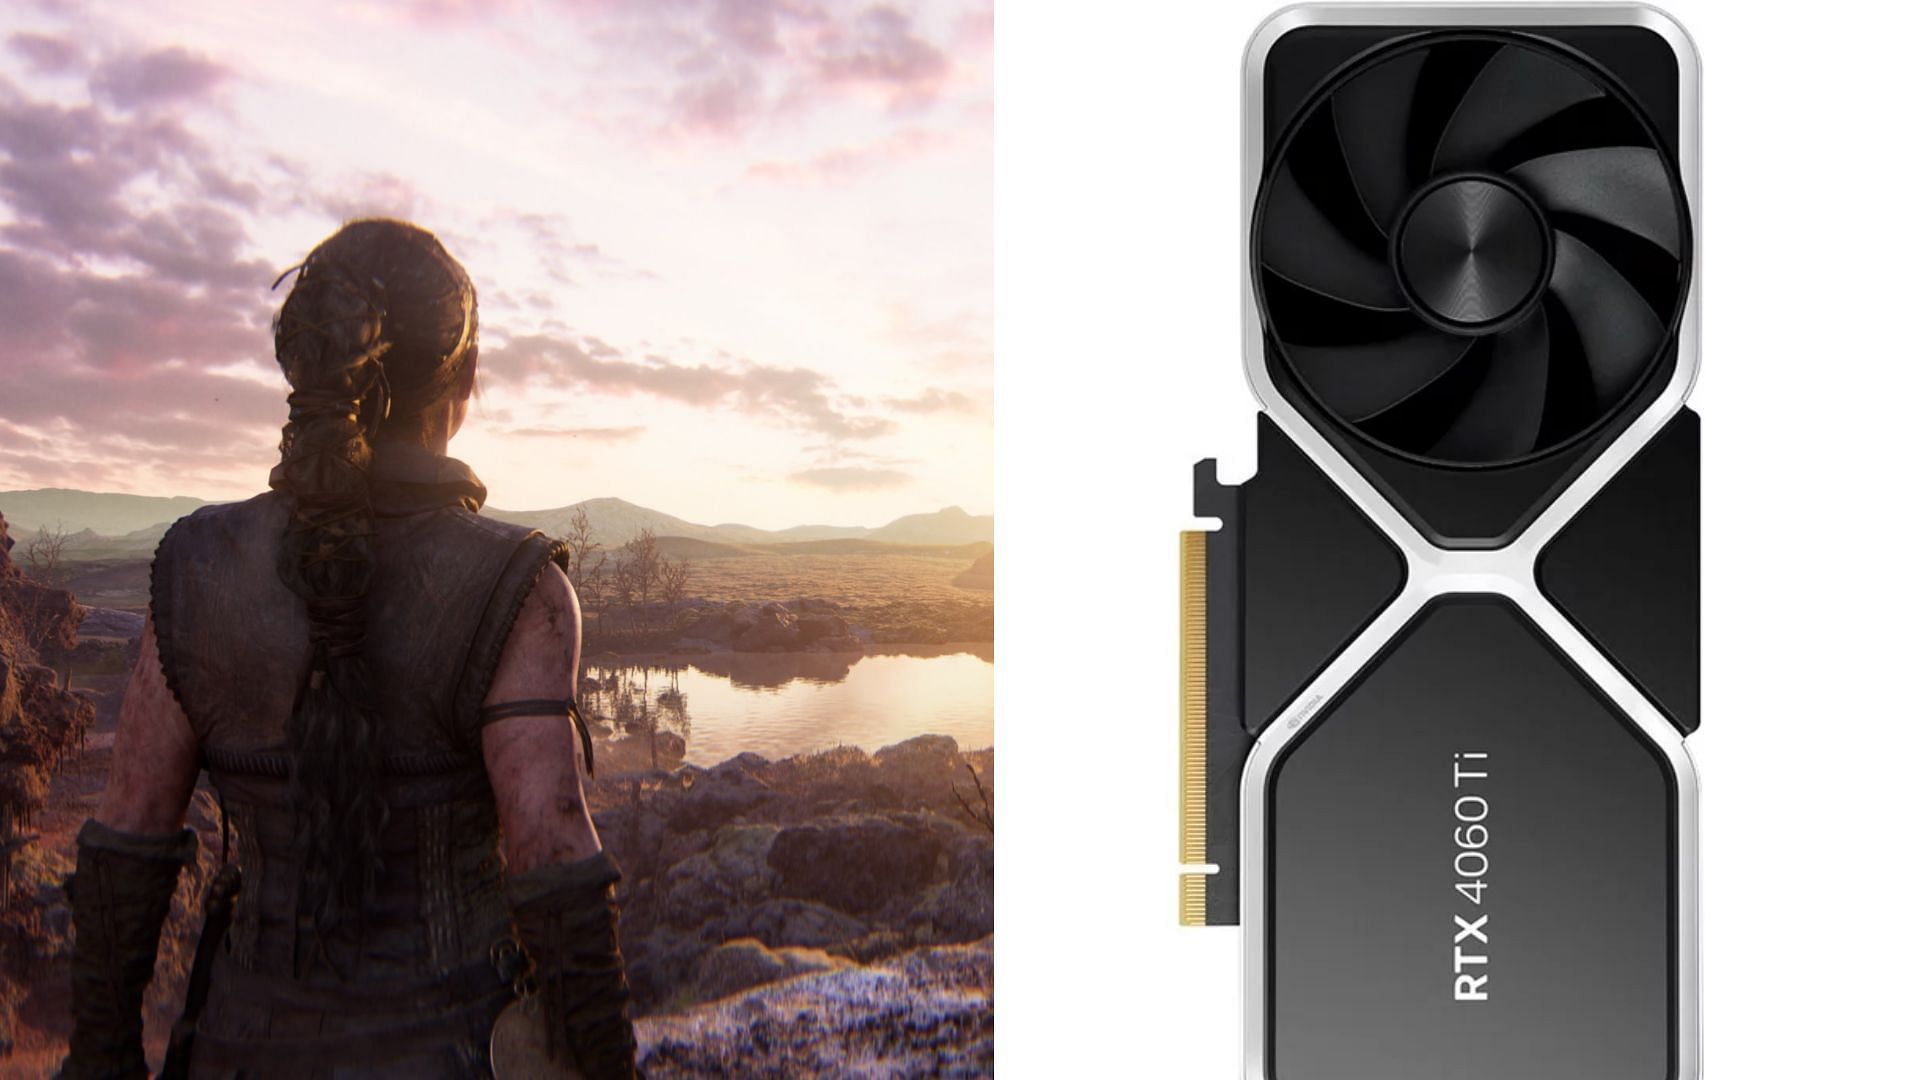 The Nvidia RTX 4060 and 4060 Ti are powerful GPUs for playing Senua